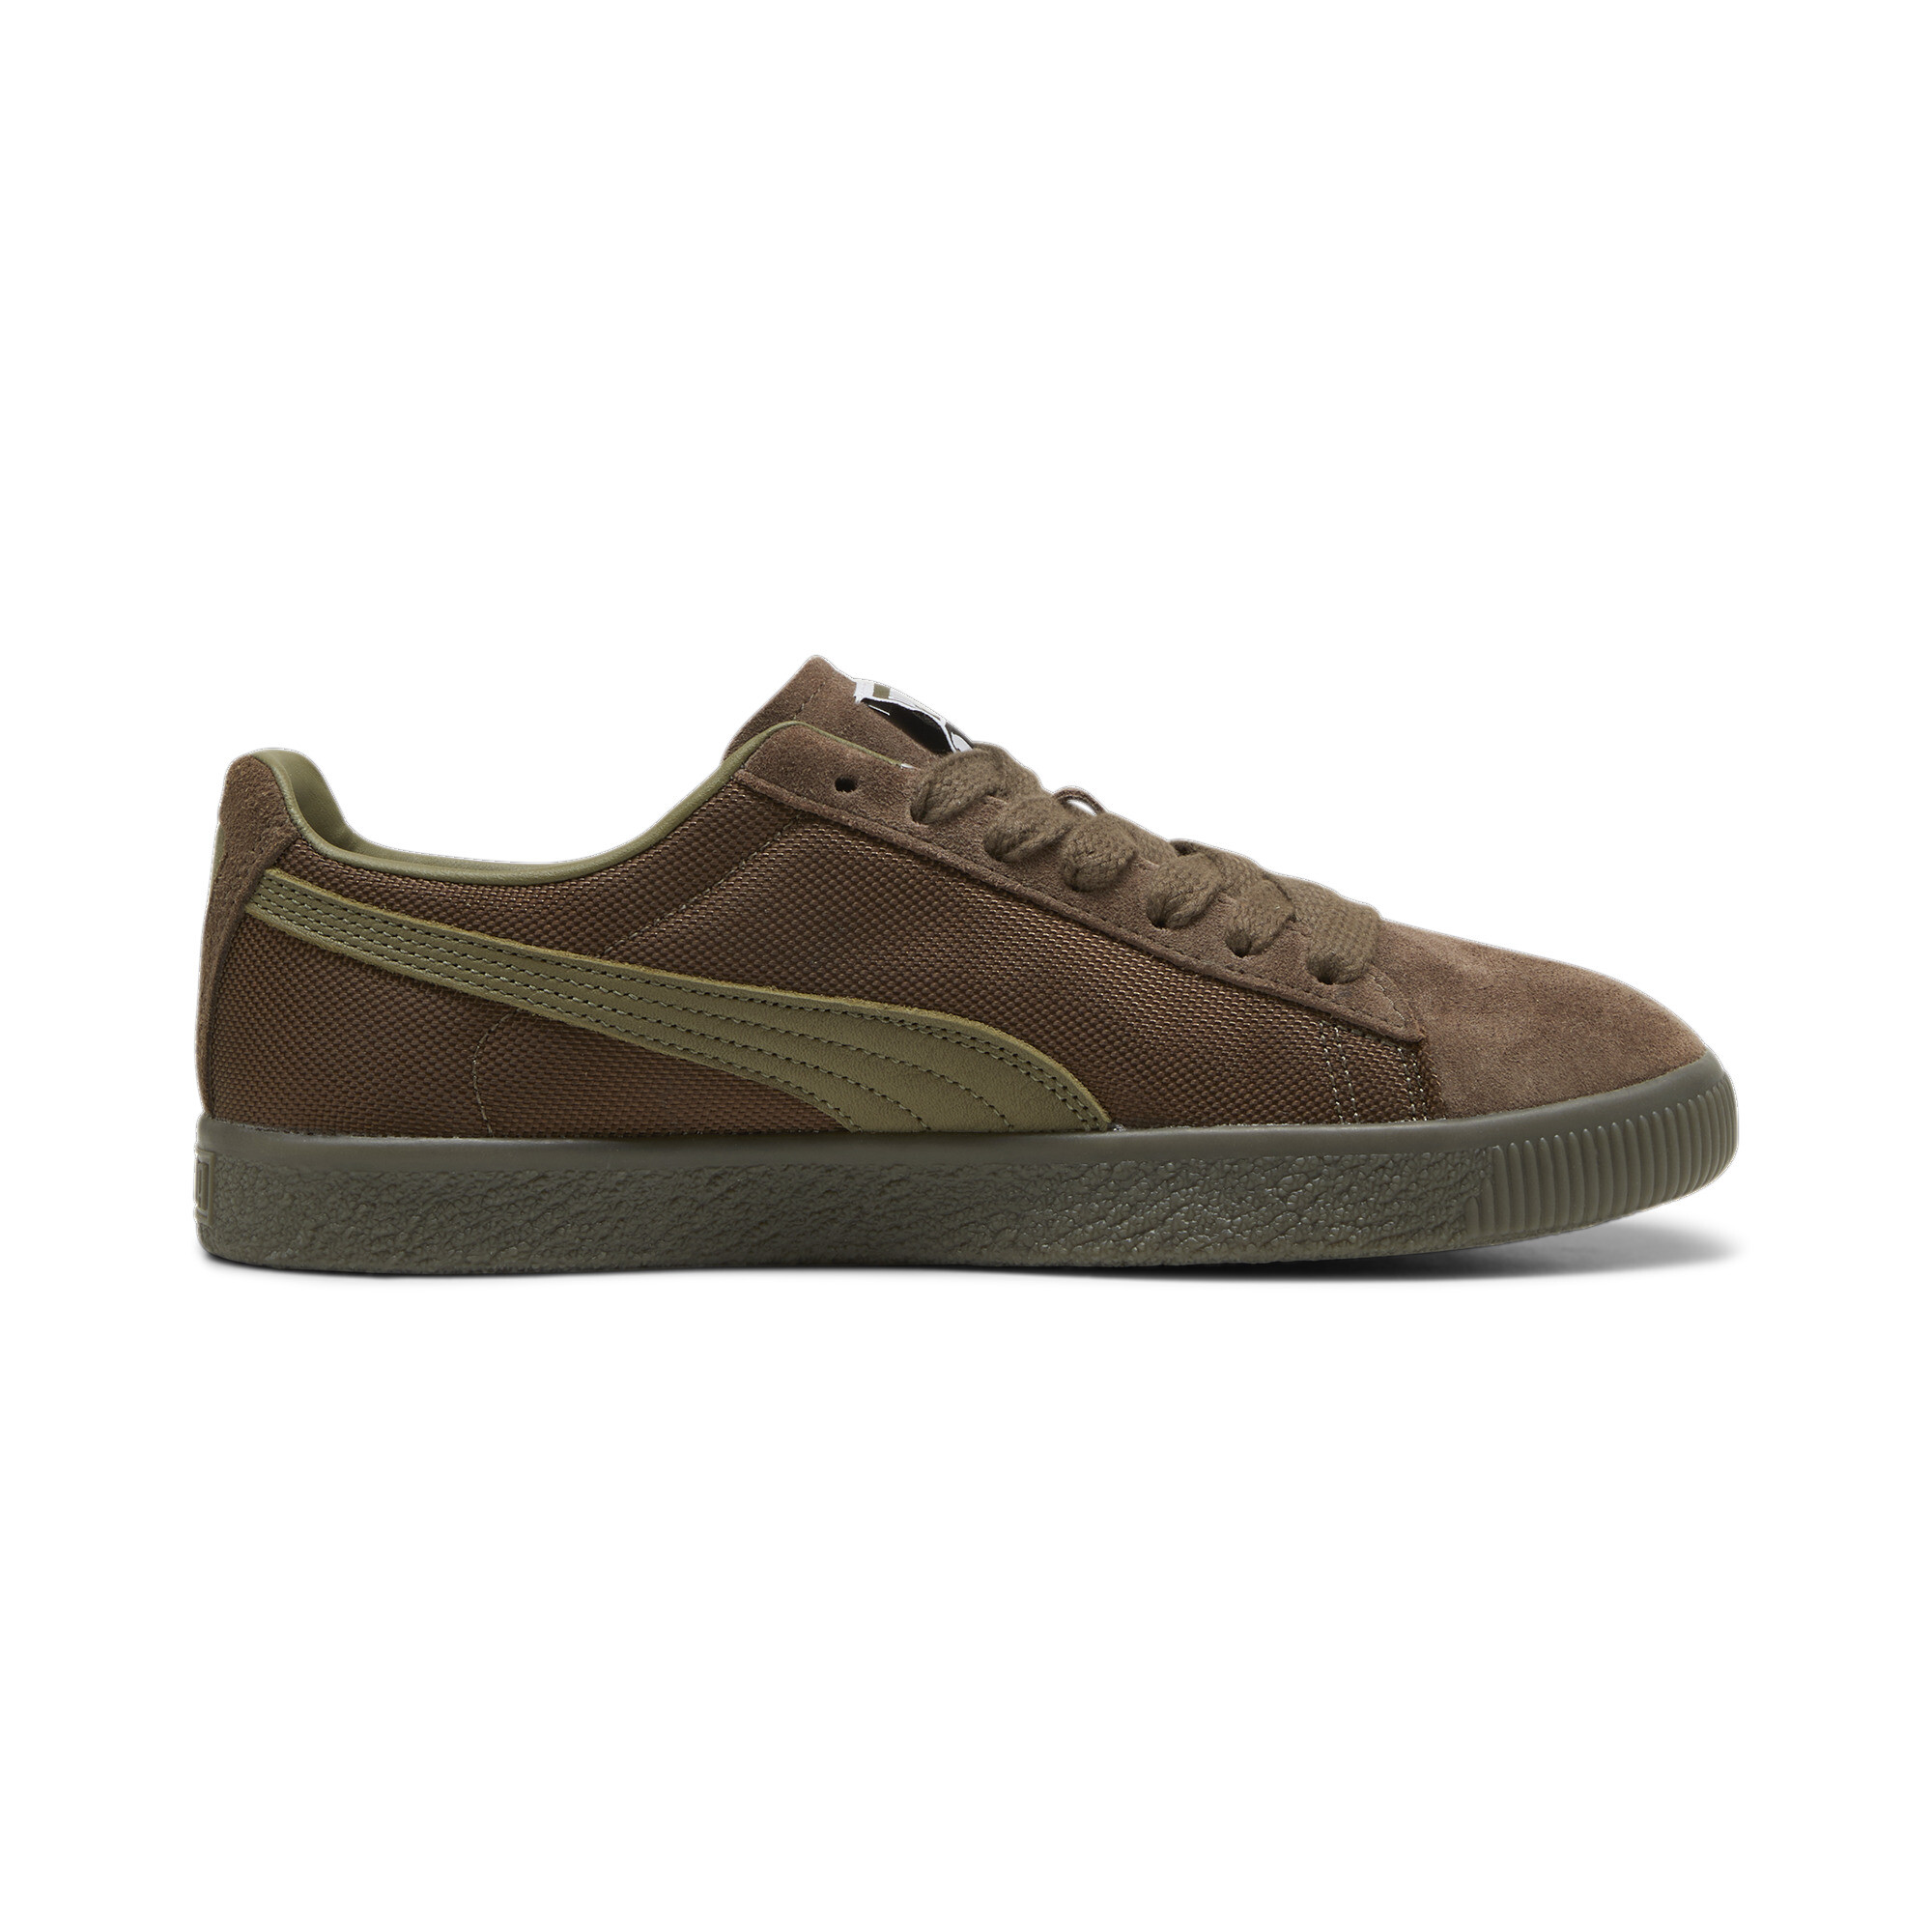 Puma Clyde Soph Sneakers, Brown, Size 35.5, Shoes